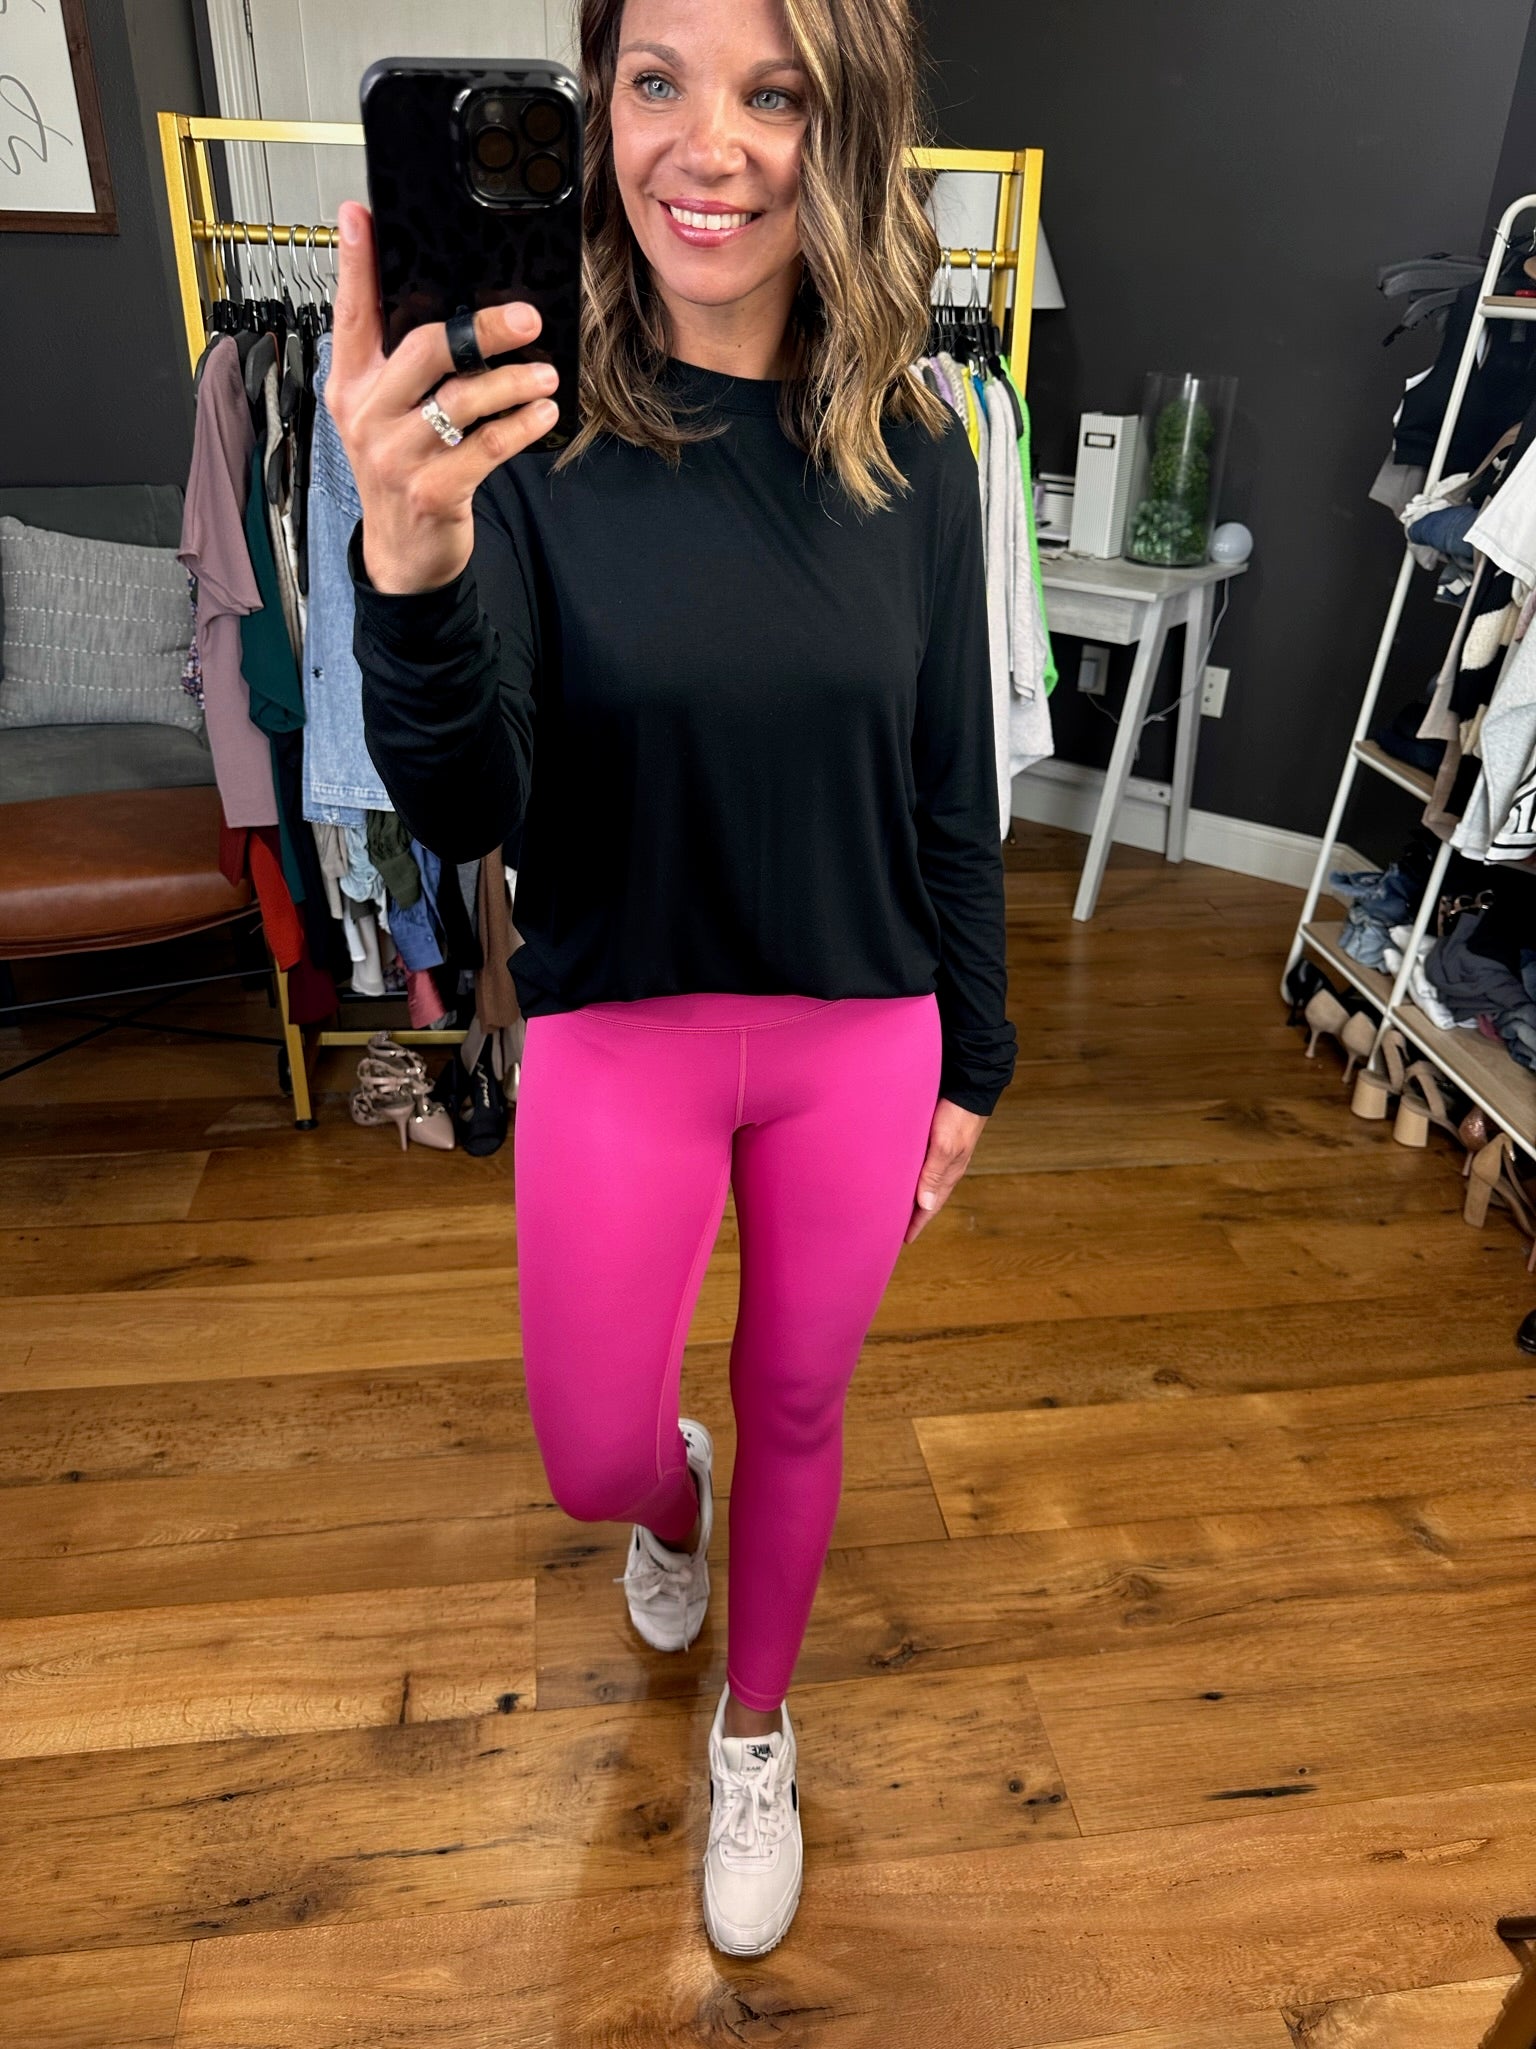 Hot Pink Leggings Outfits (2 ideas & outfits)